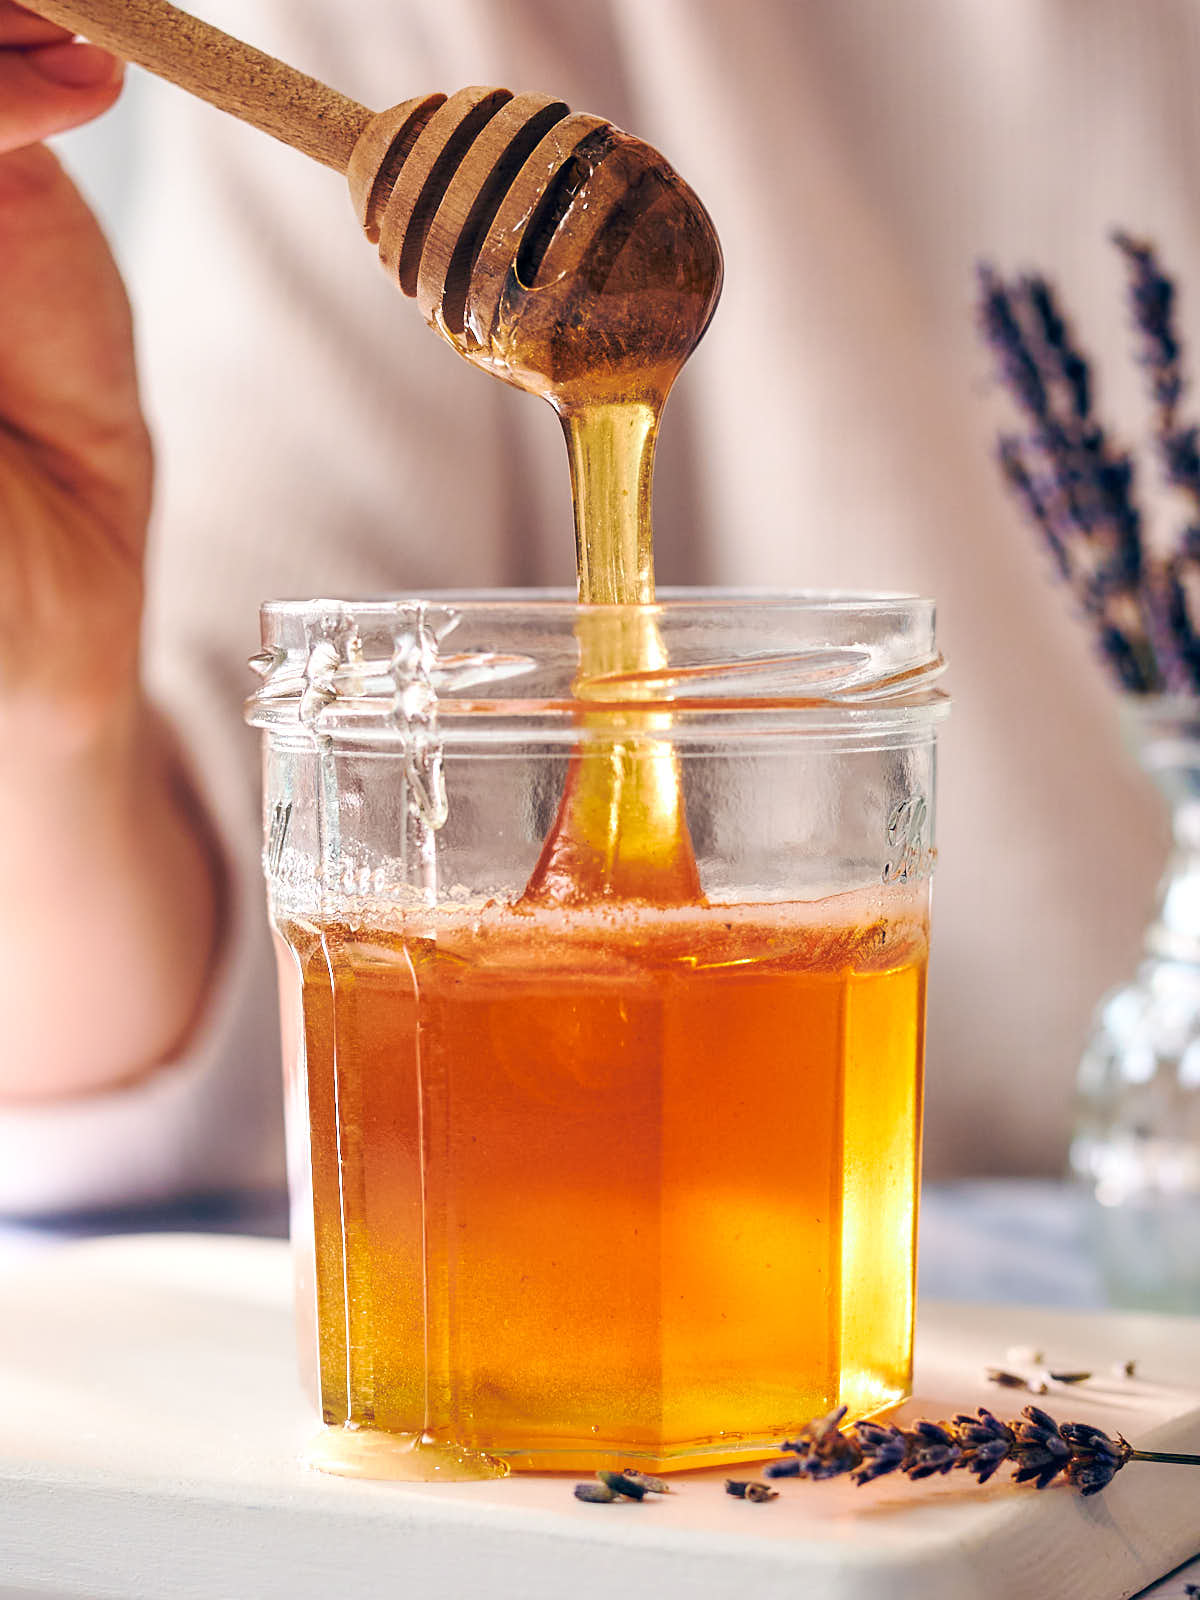 A honey stick being dipped into a jar of infused lavender honey.